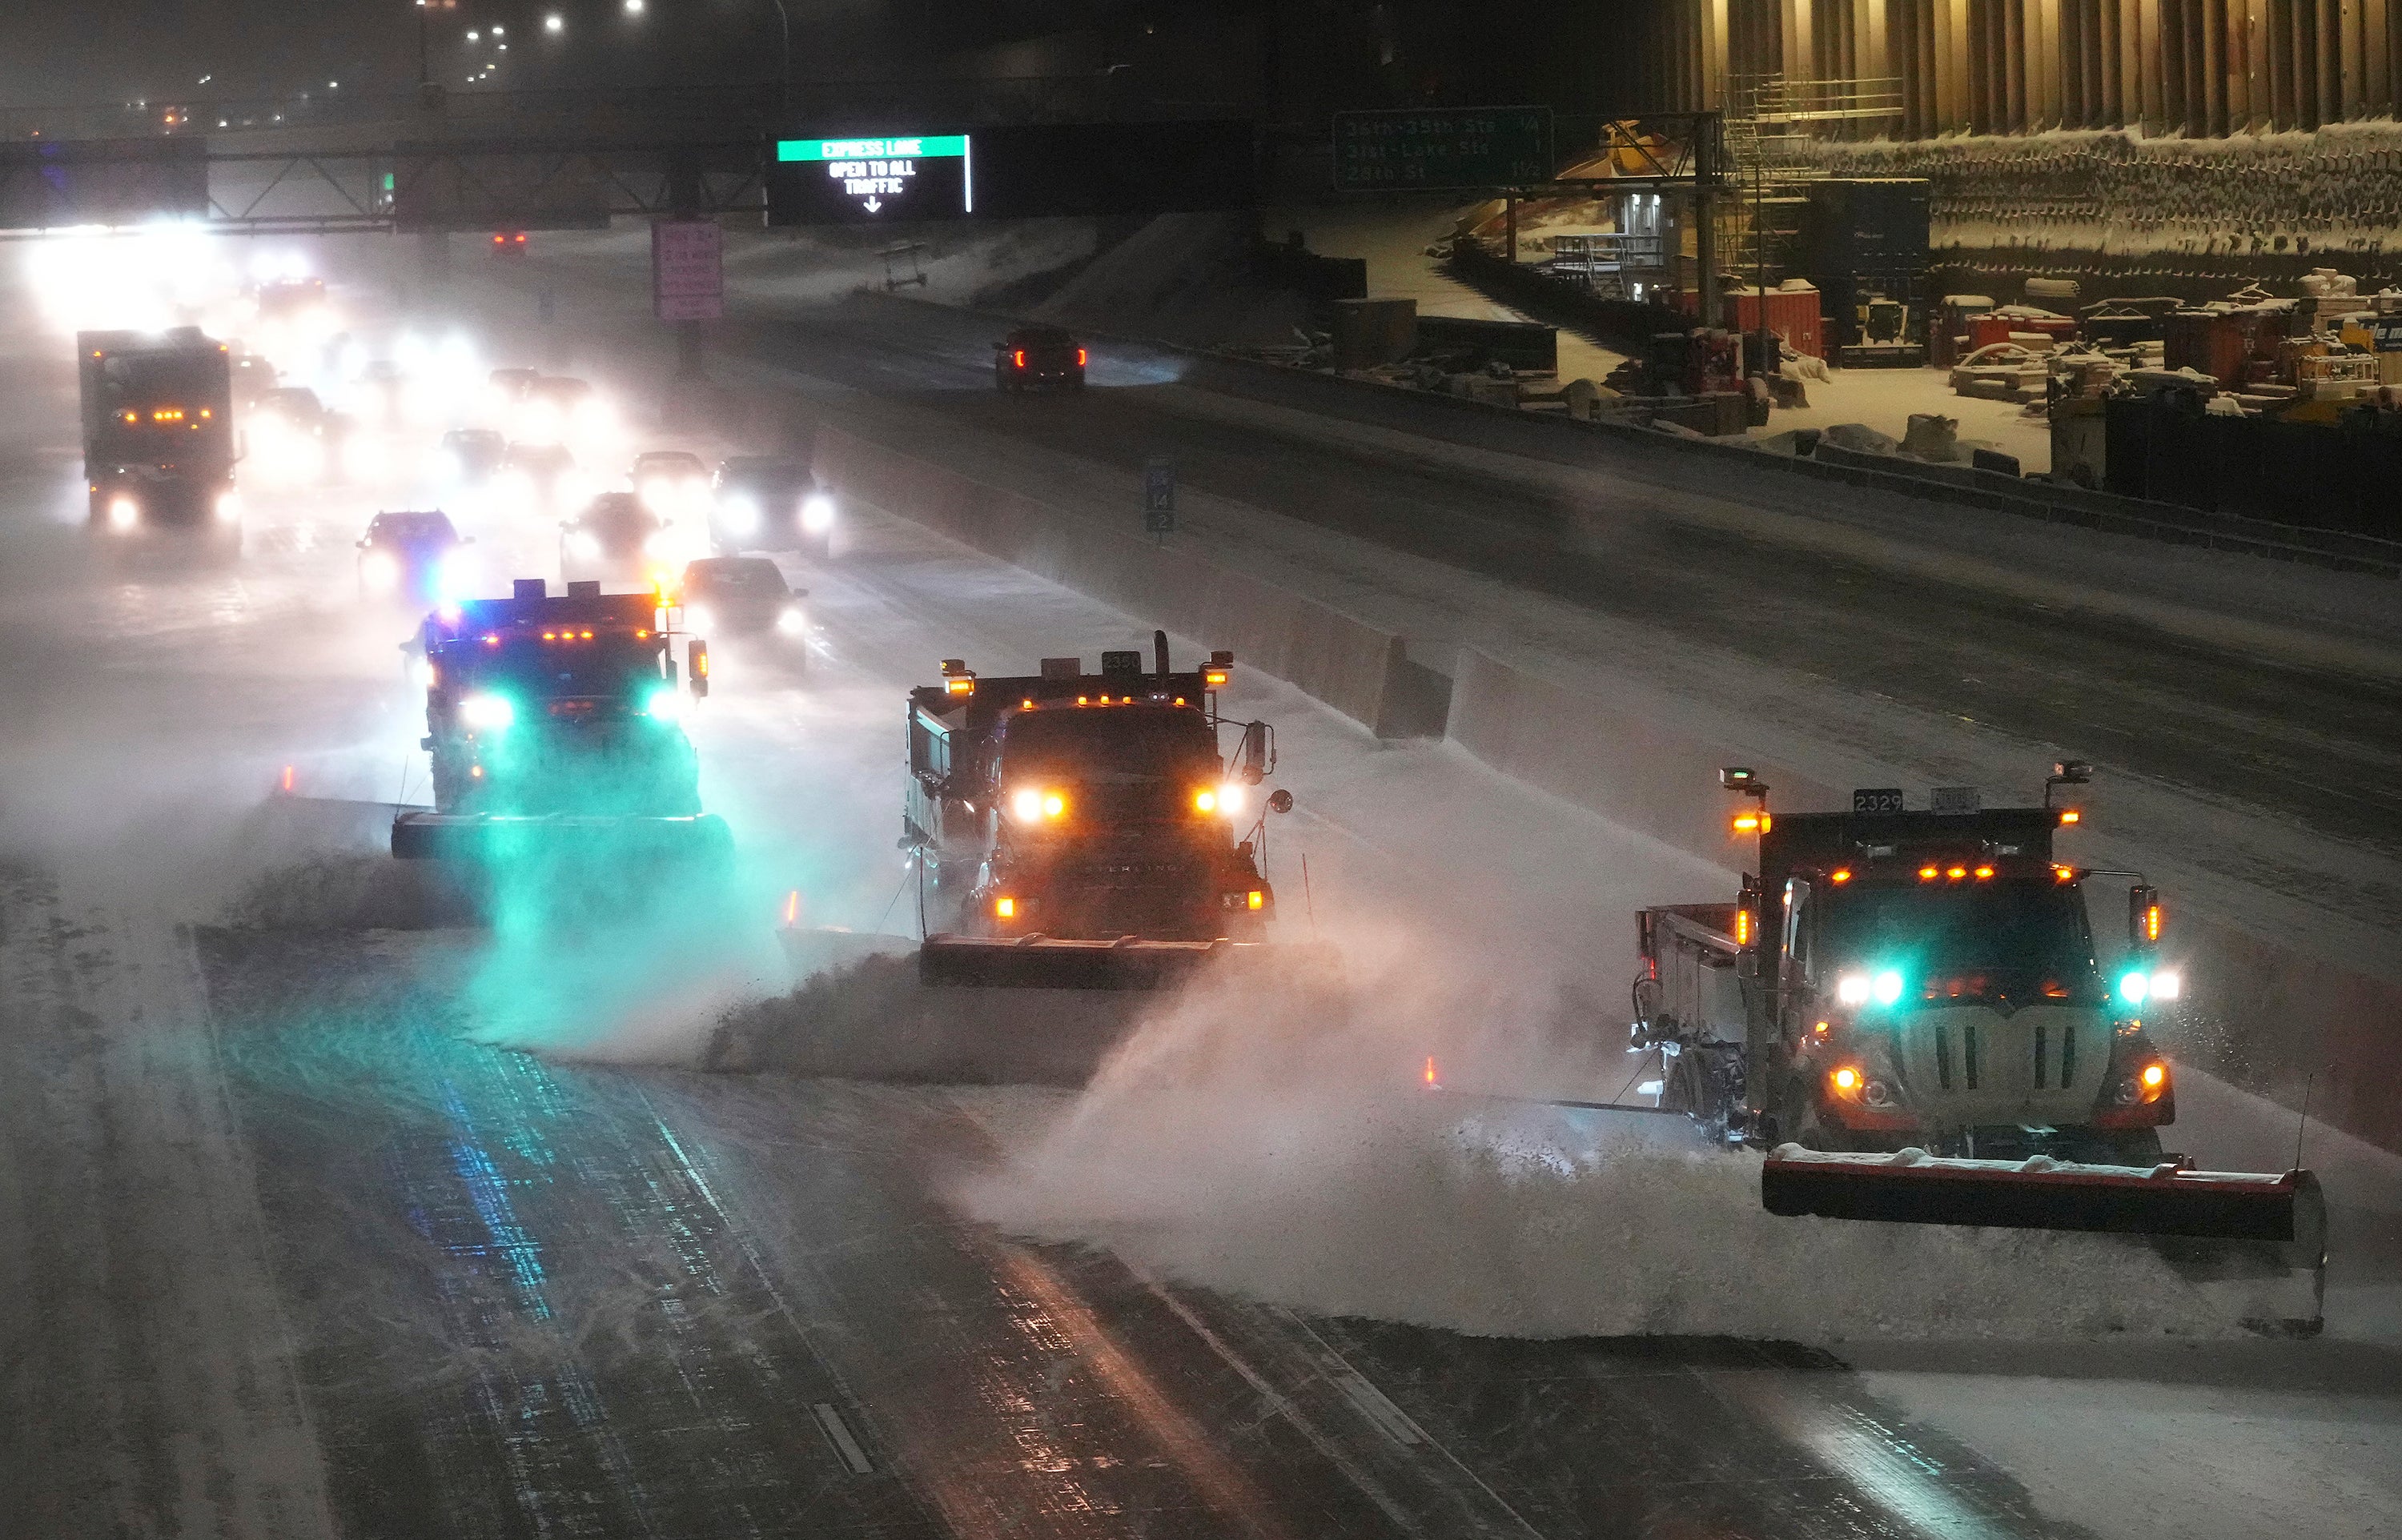 Snow plows hit the interstate highway I-35 as Minnesota prepares for a winter storm, early on Wednesday, in Minneapolis. Brutal winter weather bringing snow, dangerous gusts of wind and bitter cold settled over much of the northern US on Wednesday (David Joles/Star Tribune via AP)